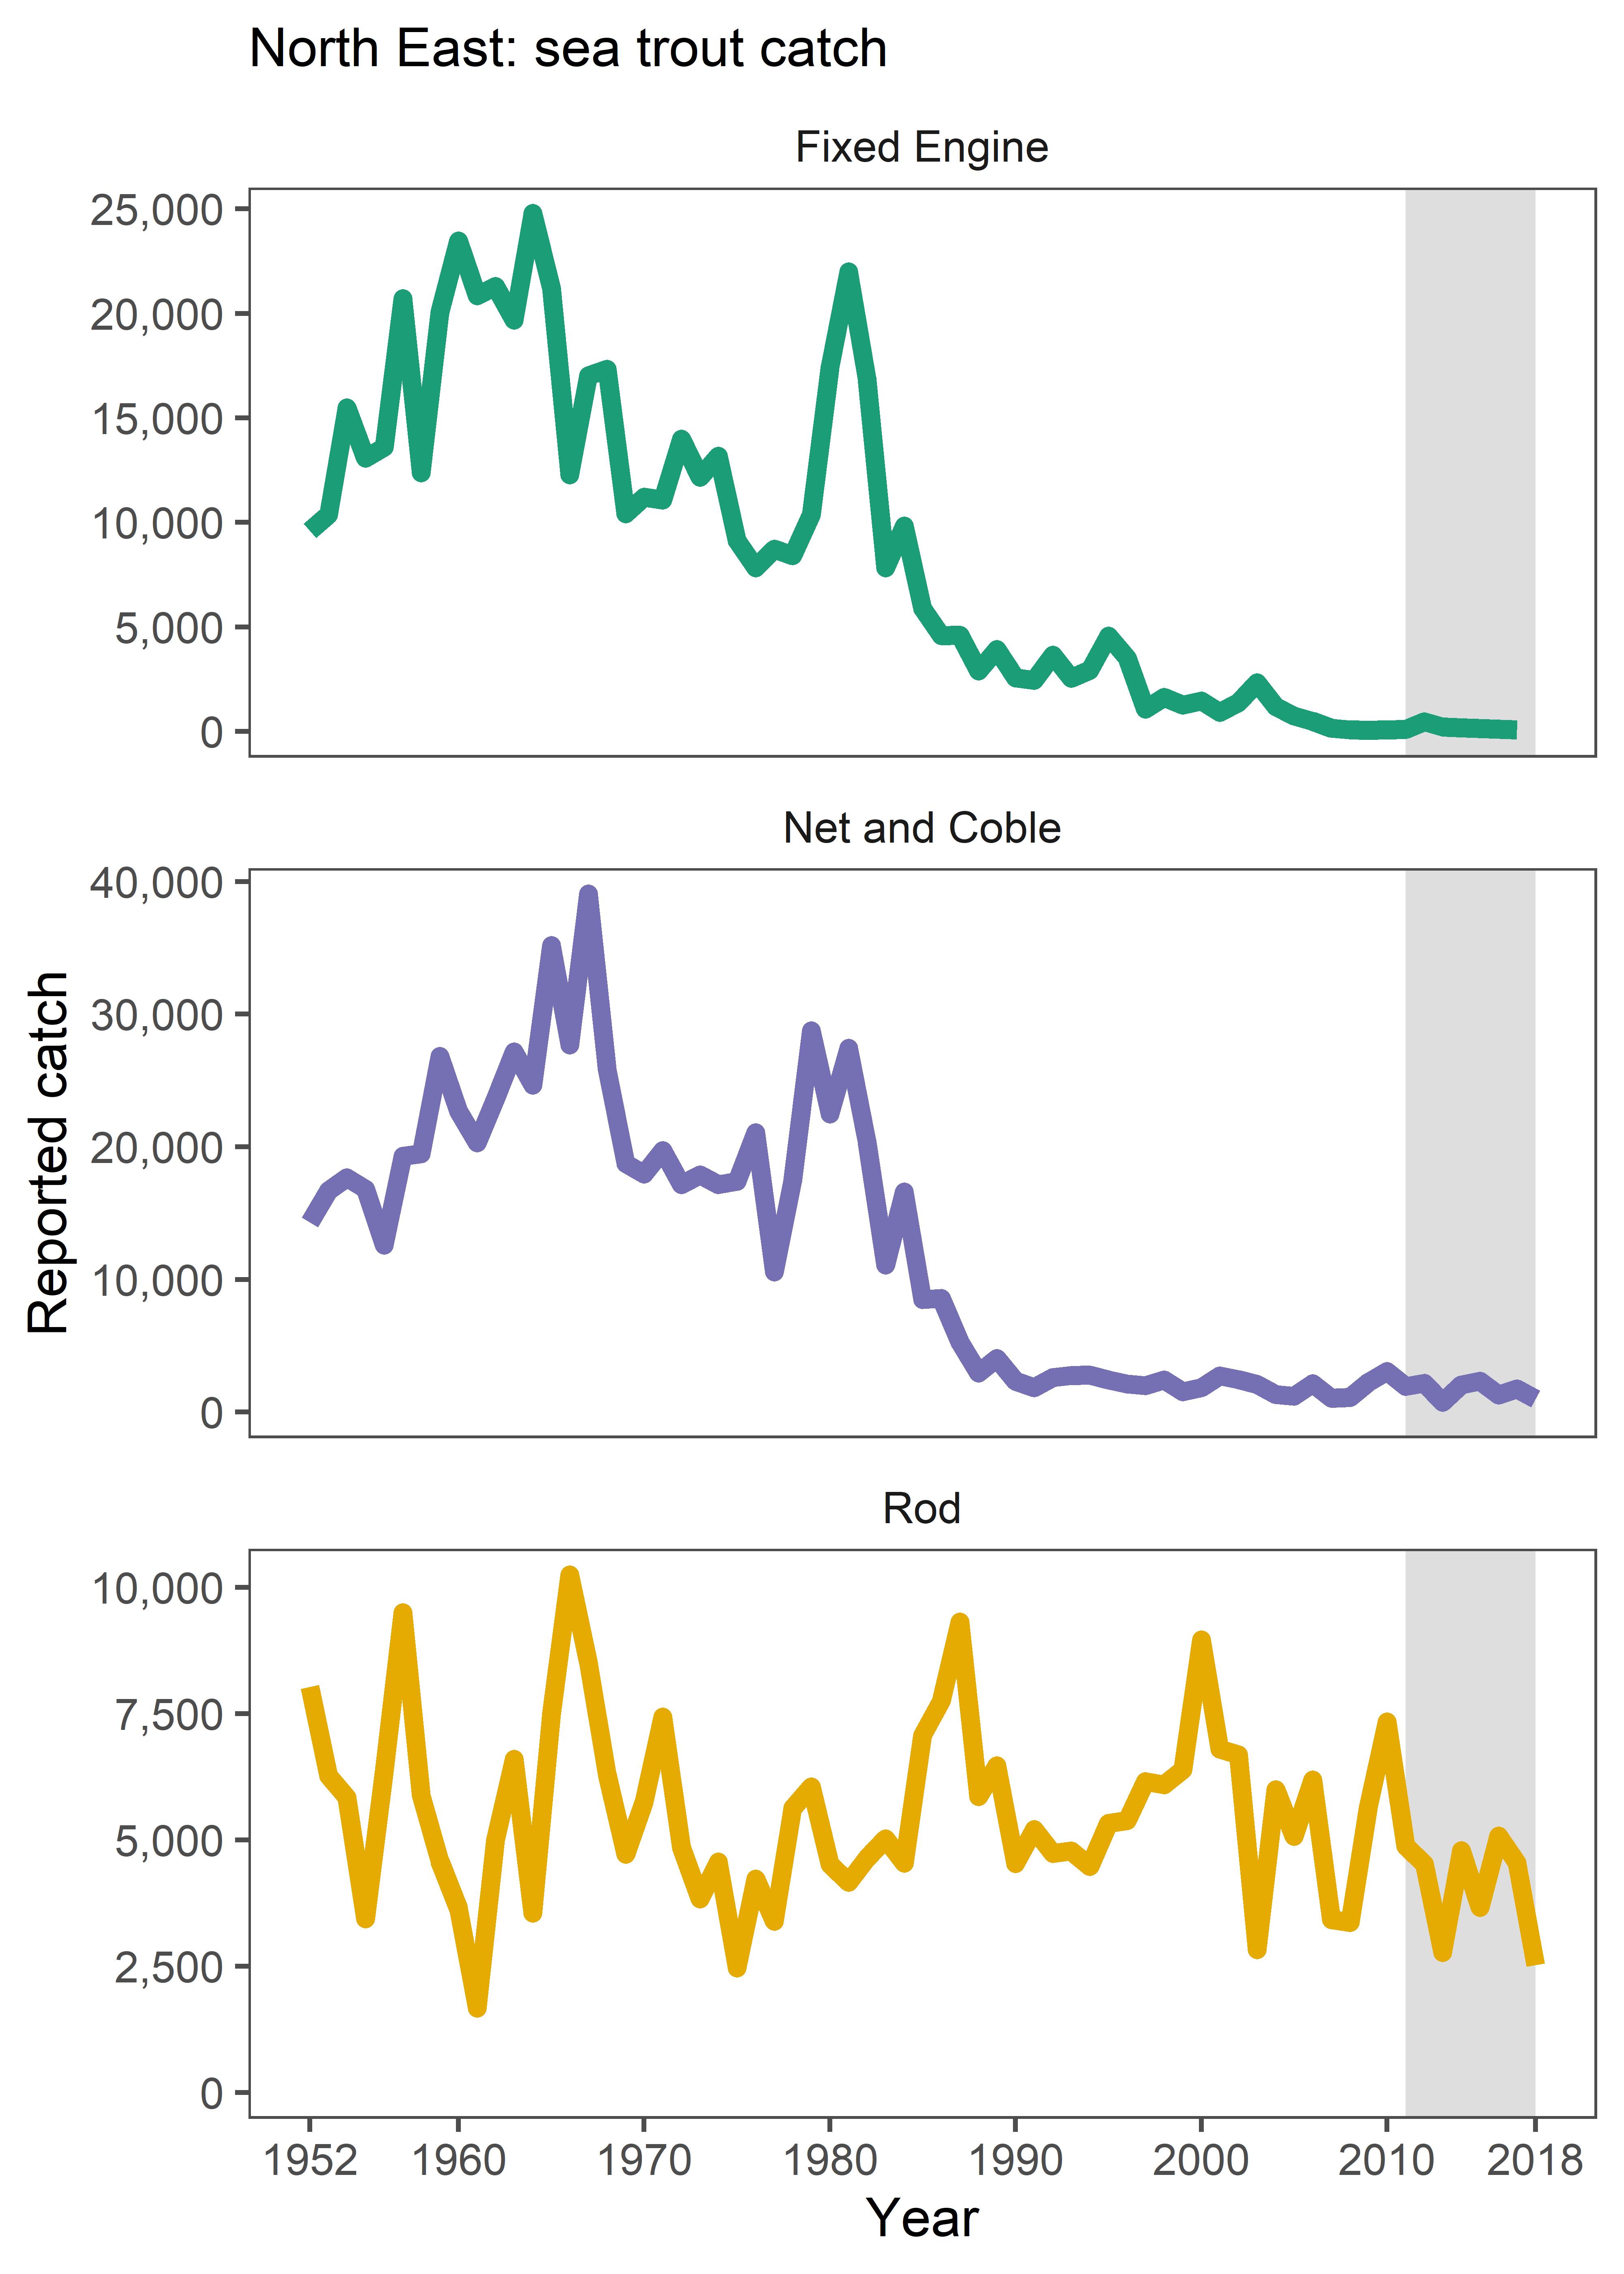 Figure e: Reported catches of sea trout from the fixed engine, net and coble and rod fisheries in the North East SMR 1952 to 2018.